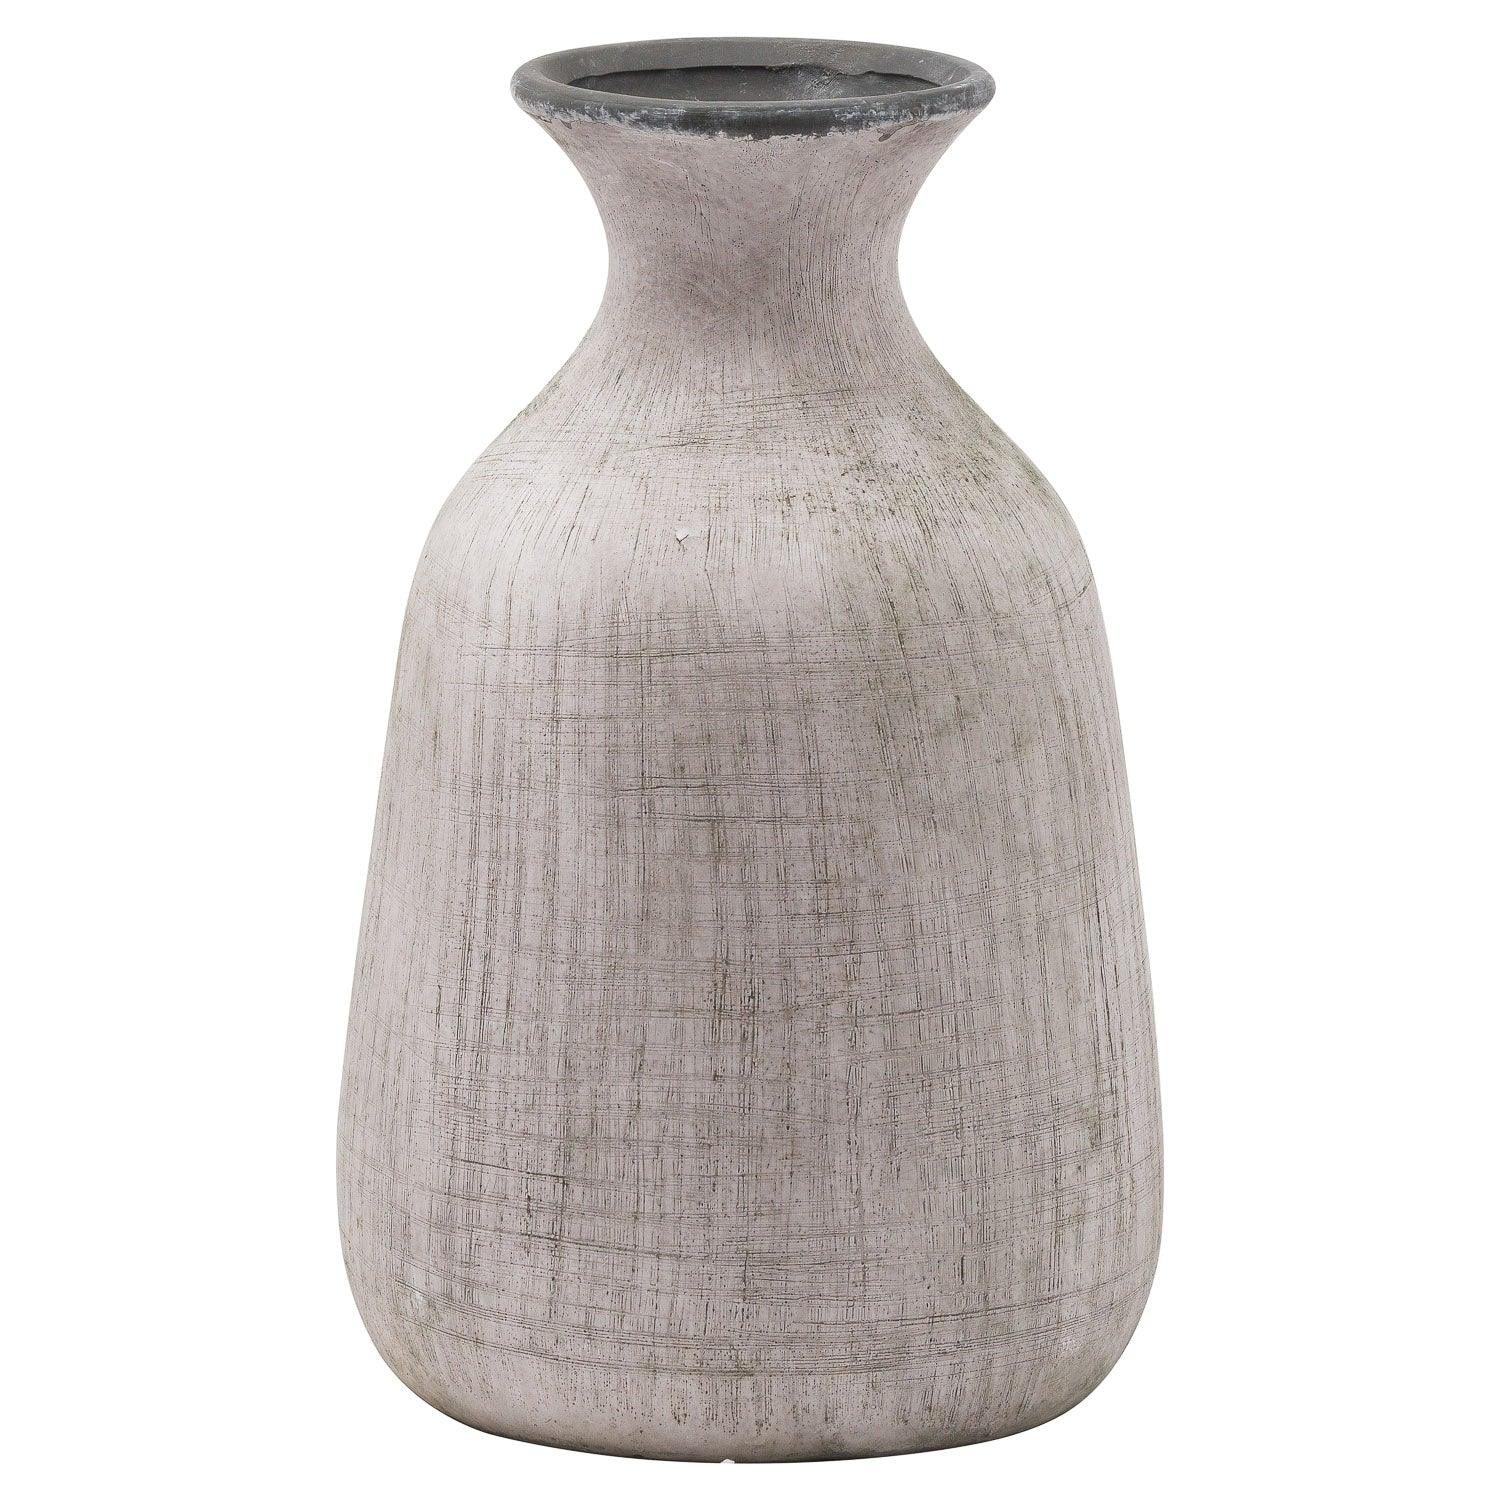 View Bloomville Ople Stone Vase information